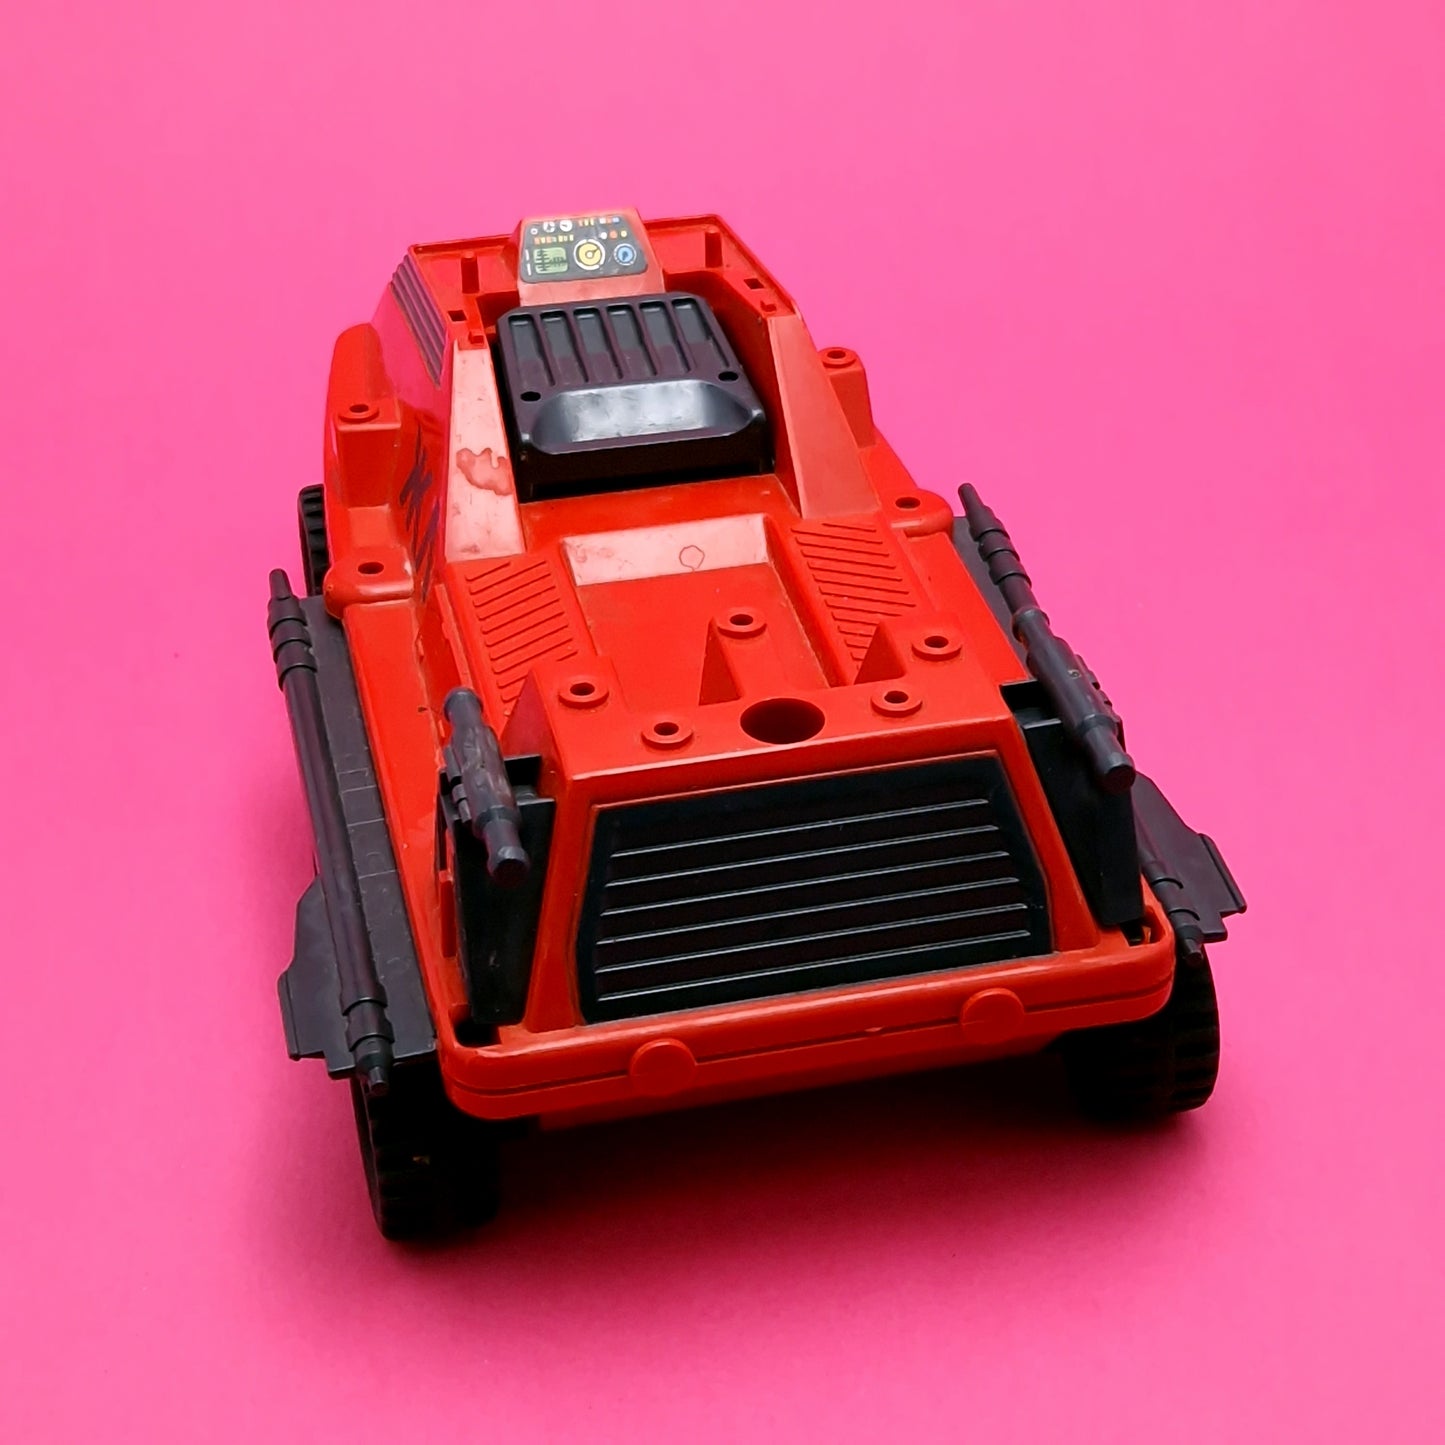 ACTION FORCE ☆ SHADOWTRAK VEHICLE for Figure ☆ Vintage Palitoy